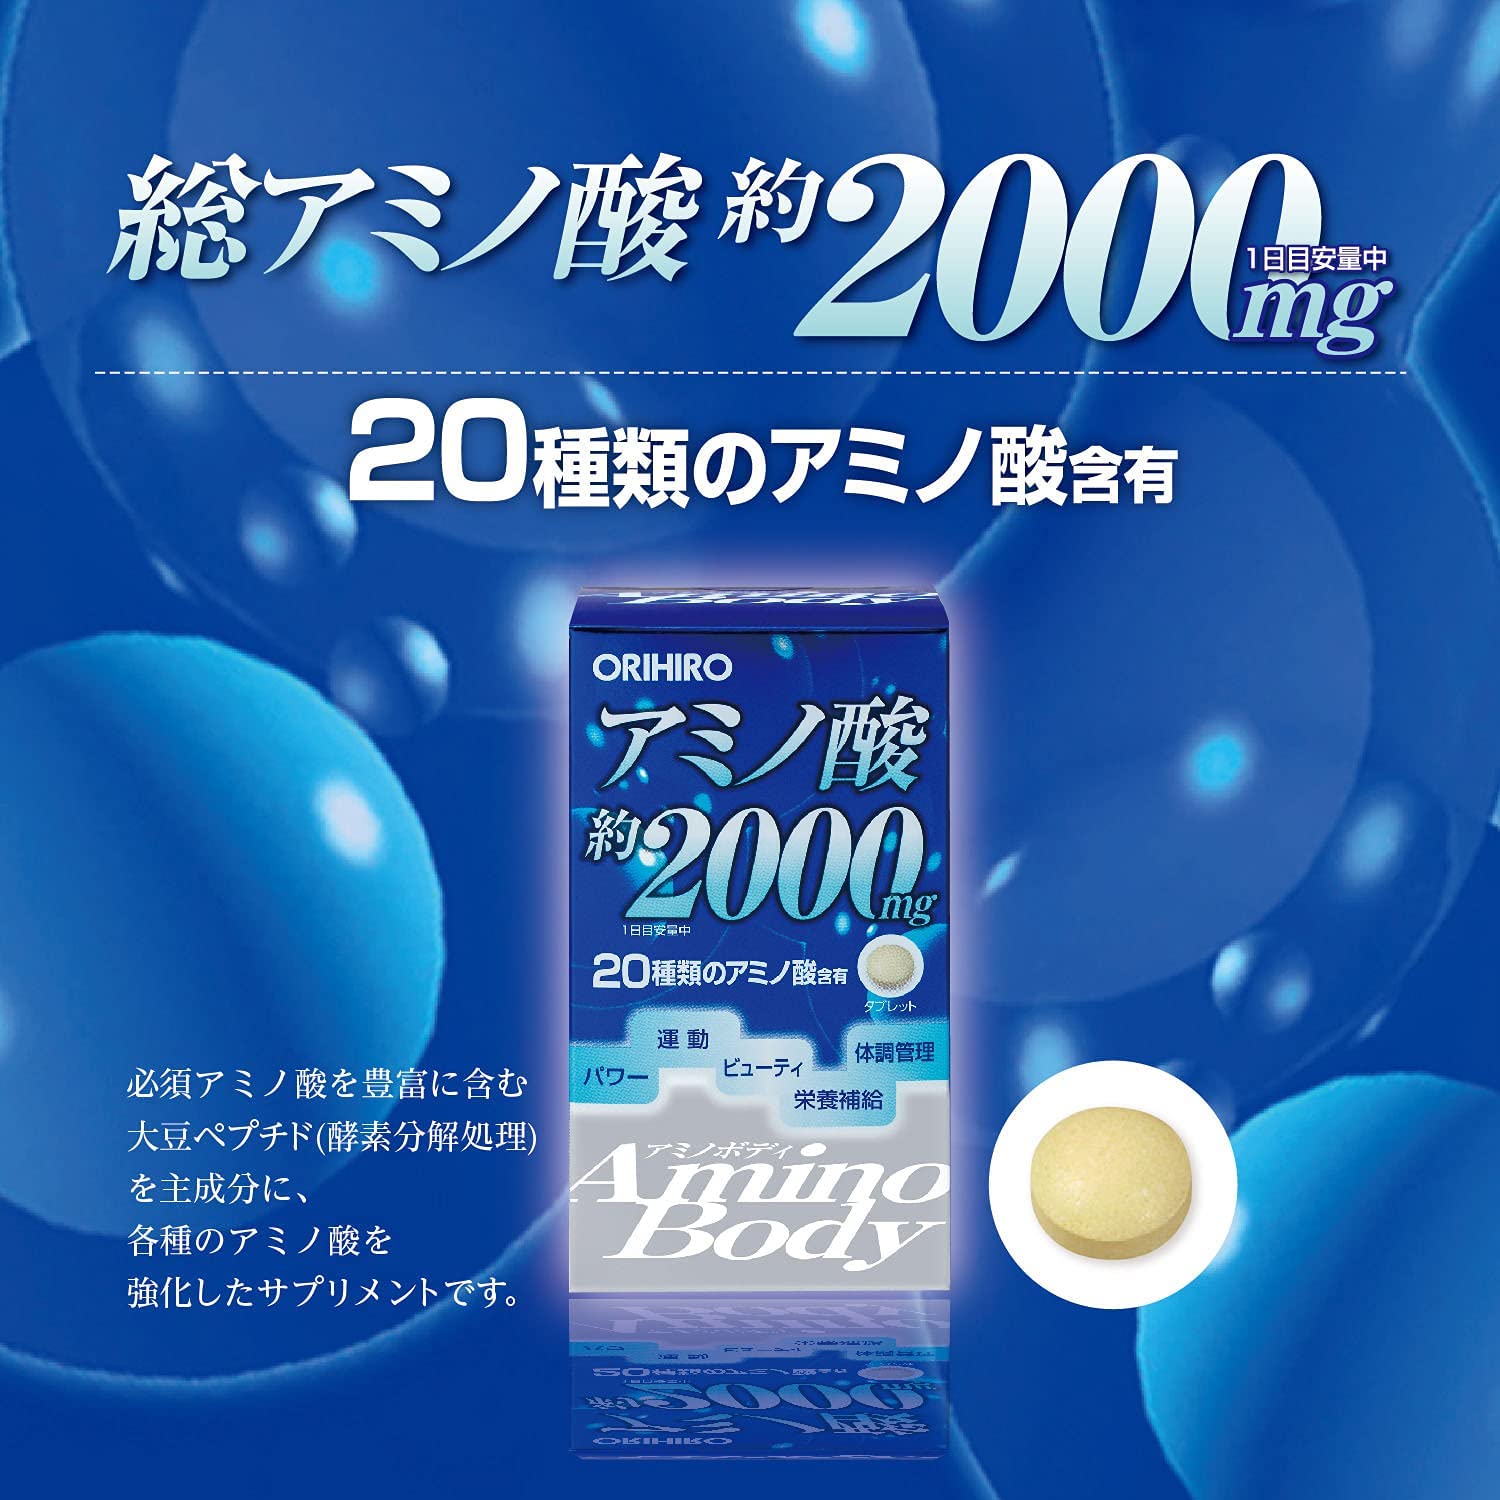 ORIHIRO Amino Body (Soy Peptide) Supplement for 25 Days